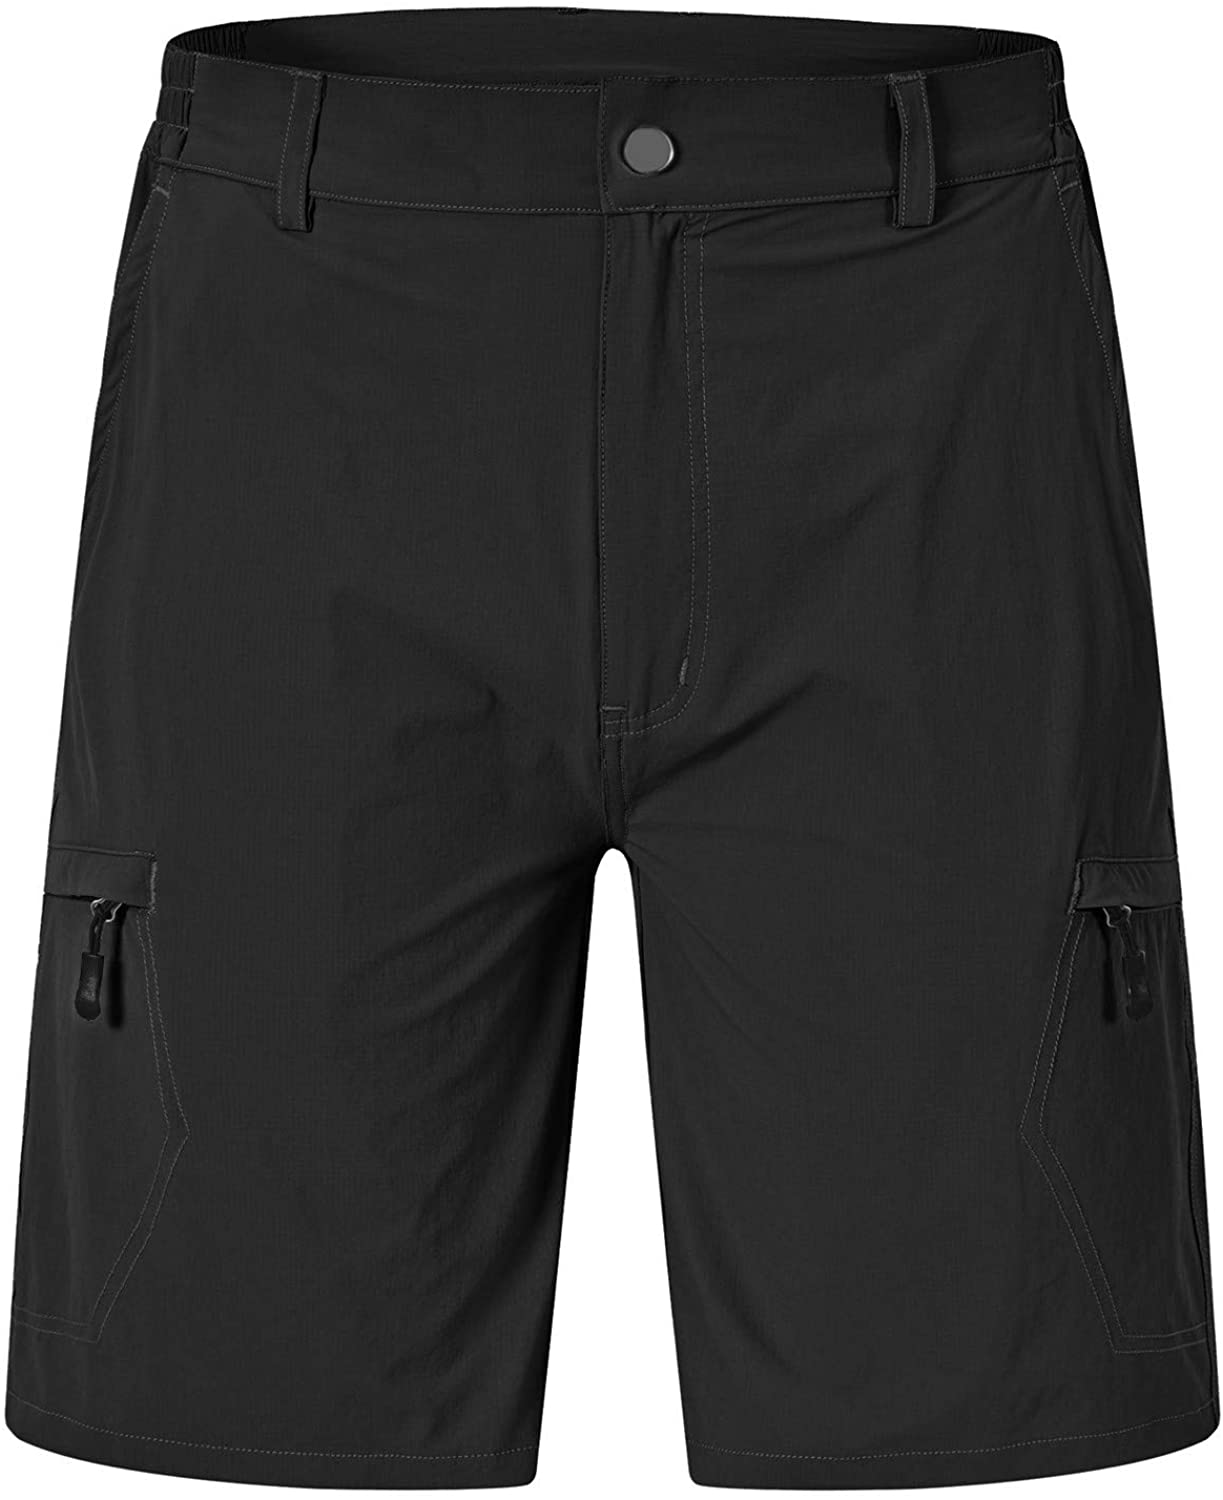 Rdruko Men's Stretchy Quick Dry Cargo Shorts Hiking Cycling Camping Travel Shorts with 6 Pockets 